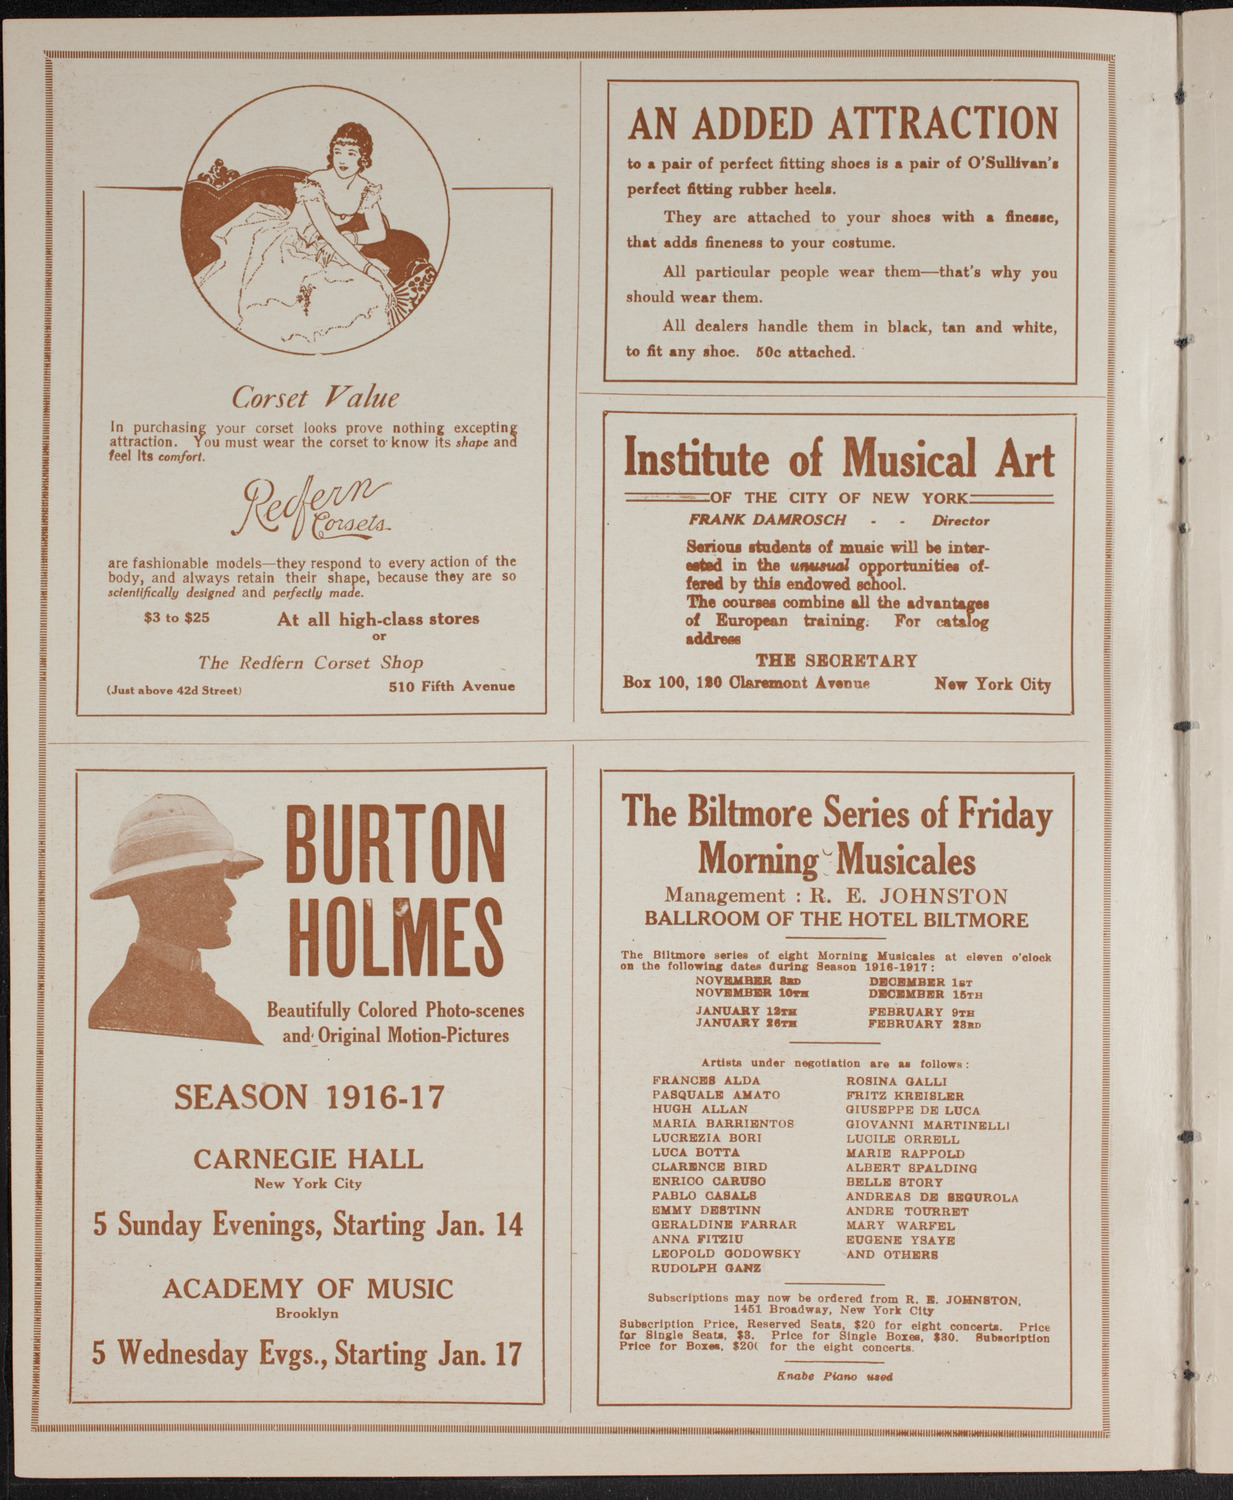 Graduation: College of Dental and Oral Surgery of New York, June 6, 1916, program page 2